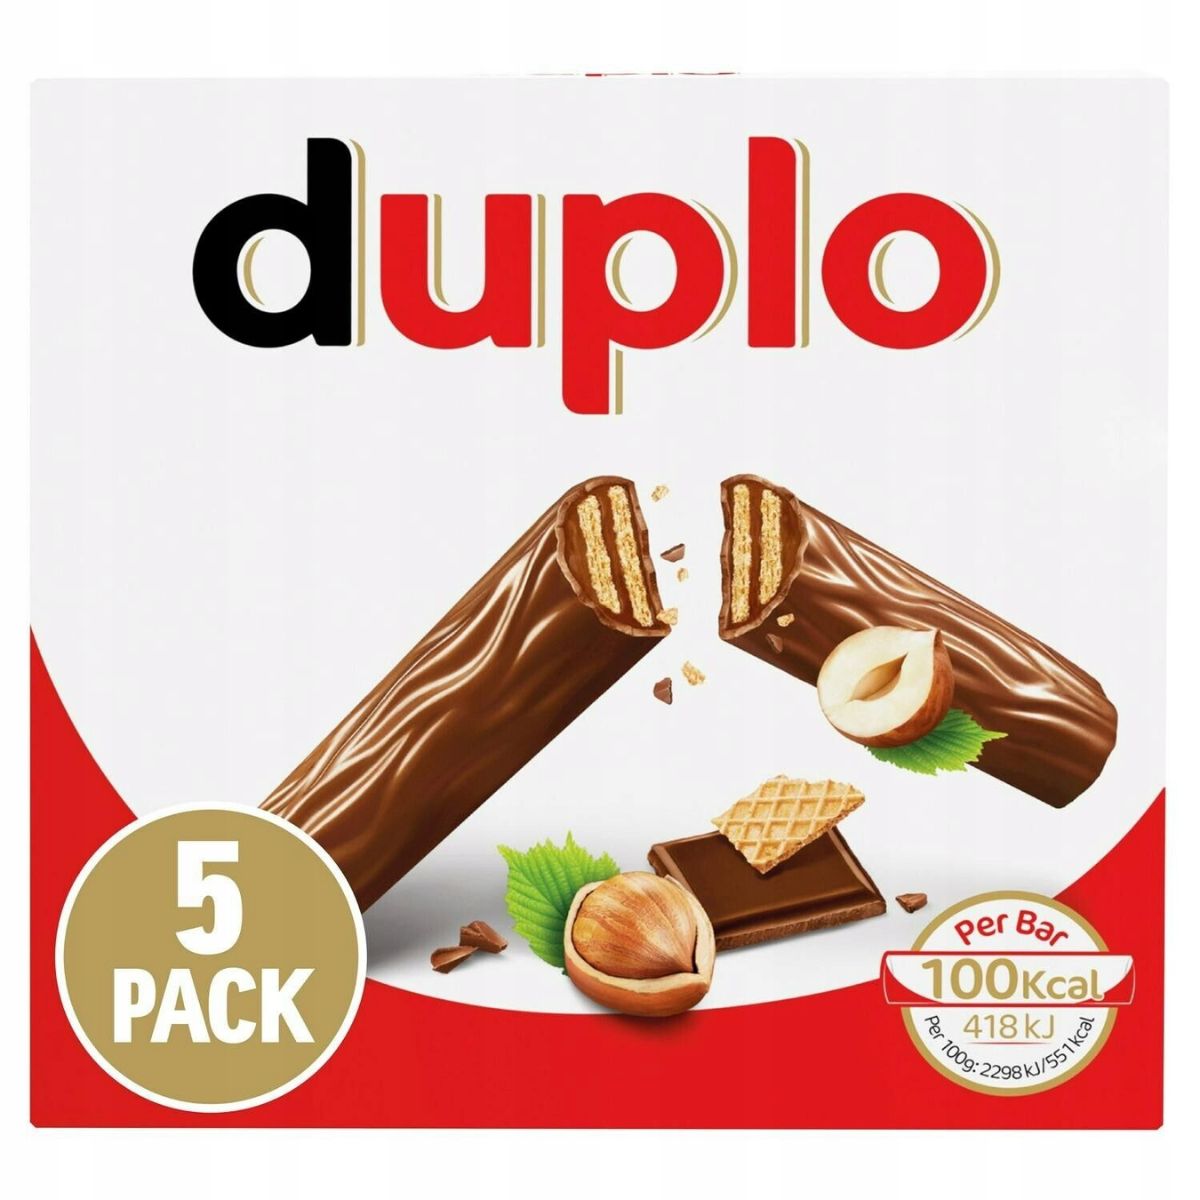 A box of Ferrero Rocher - Duplo Bars - 5 x 18.2g with nuts and hazelnuts.